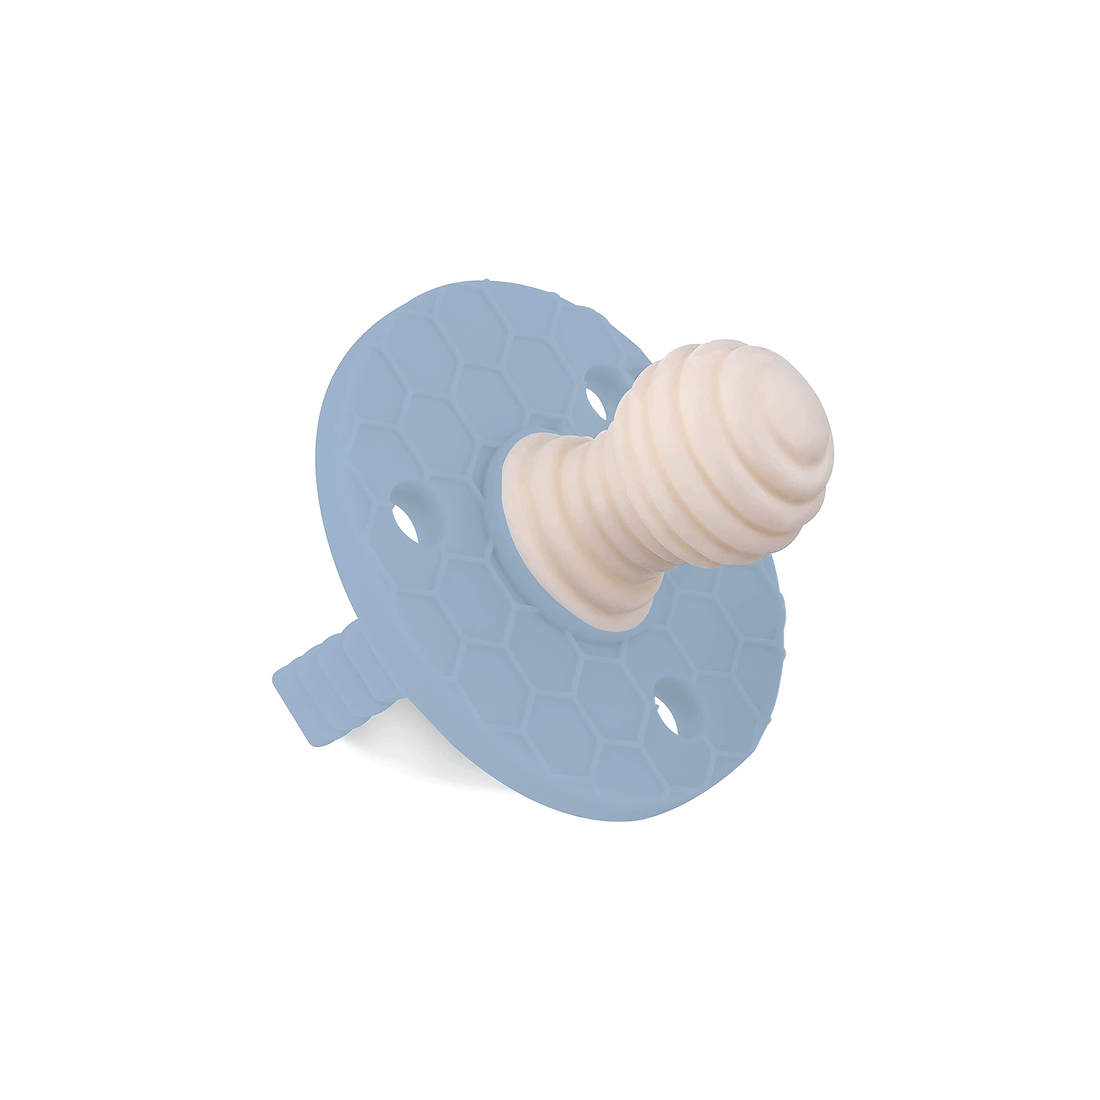 SoothiPop Silicone Teething Pacifier Round Shaped Ridge - Mist Blue